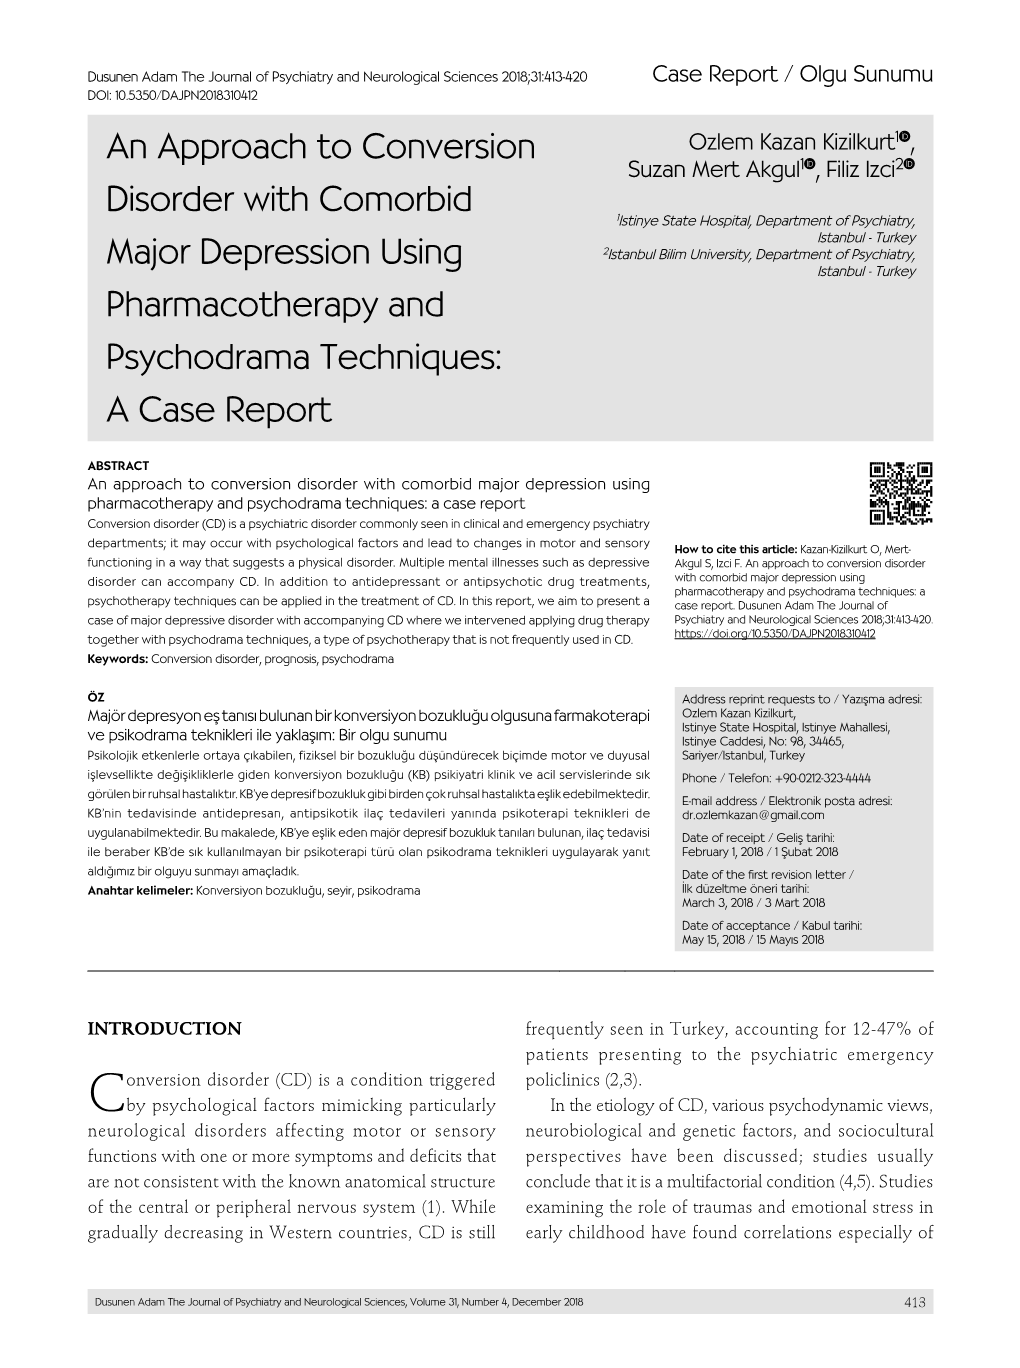 An Approach to Conversion Disorder with Comorbid Major Depression